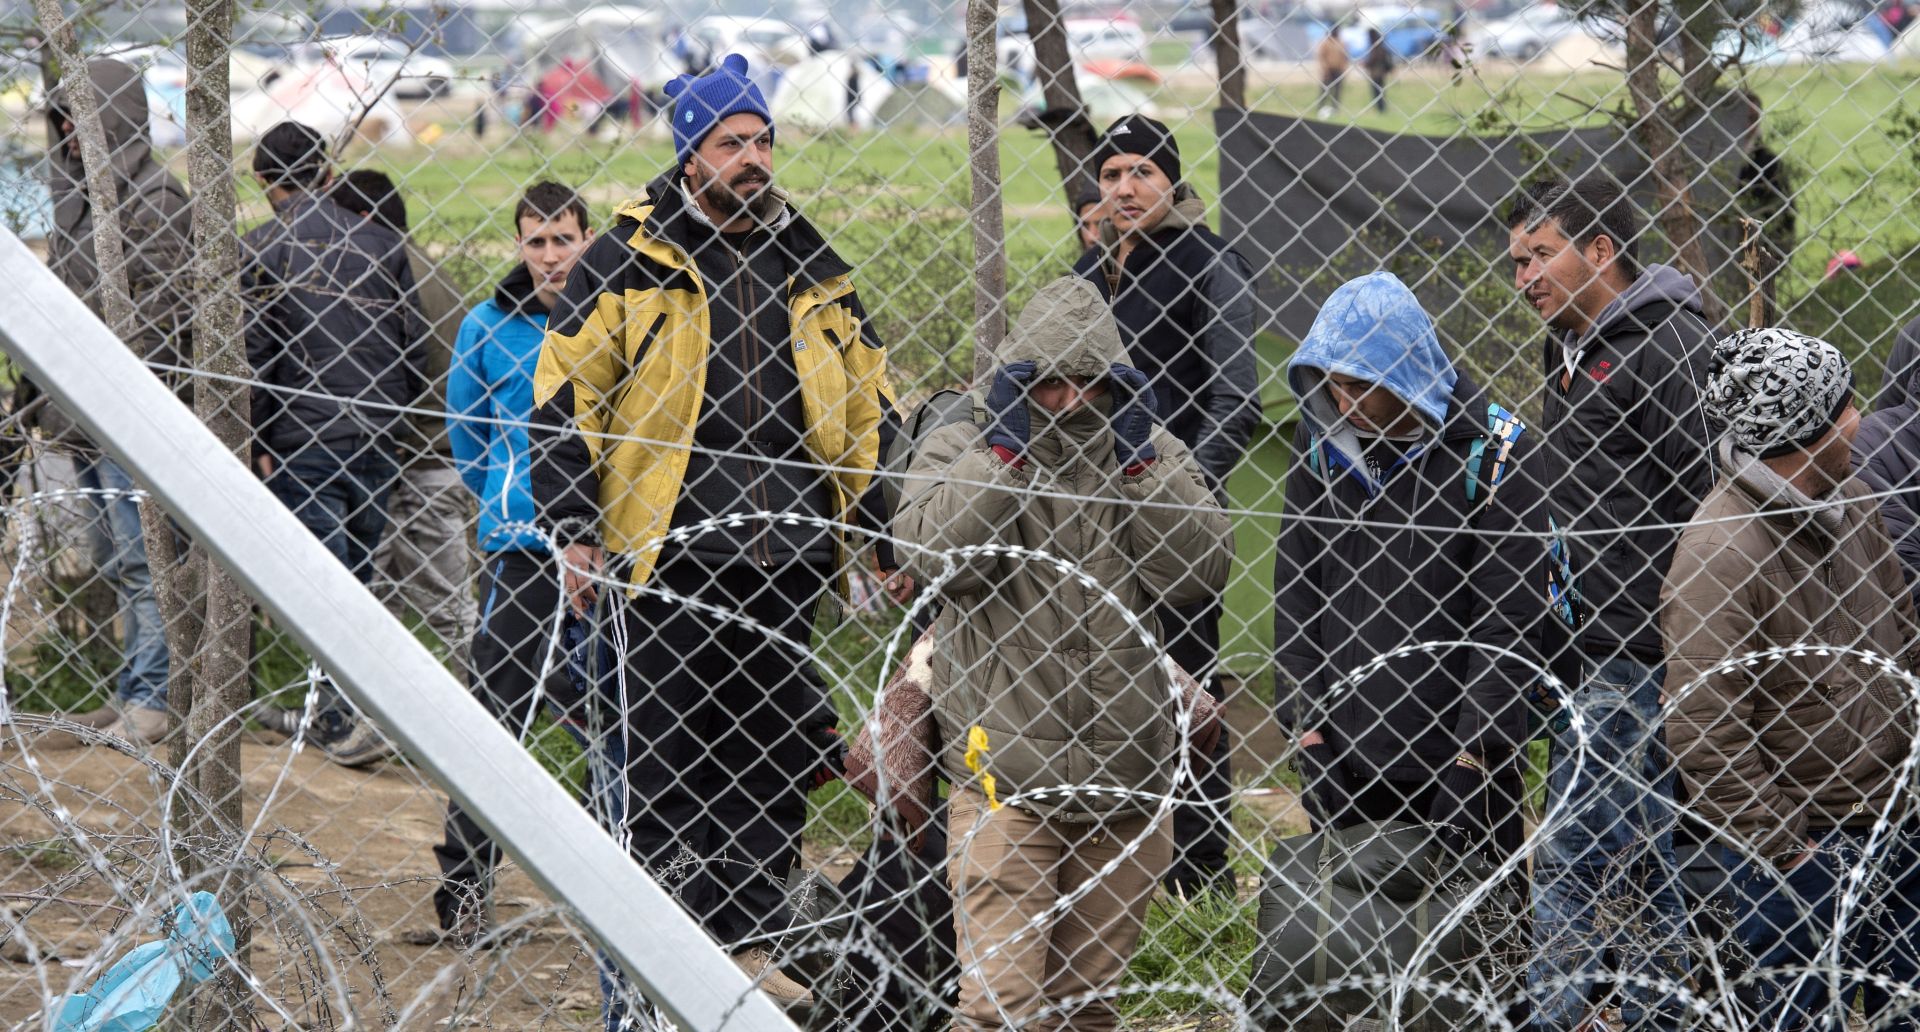 epa05232515 Refugees stand behind the fence, on the Greek side of the border near Gevgelia, The Former Yugoslav Republic of Macedonia, 27 March 2016. More than 10,000 refugees and migrants are still waiting at the makeshift camp near Idomeni to enter Macedonia and continue onto EU countries.  EPA/GEORGI LICOVSKI